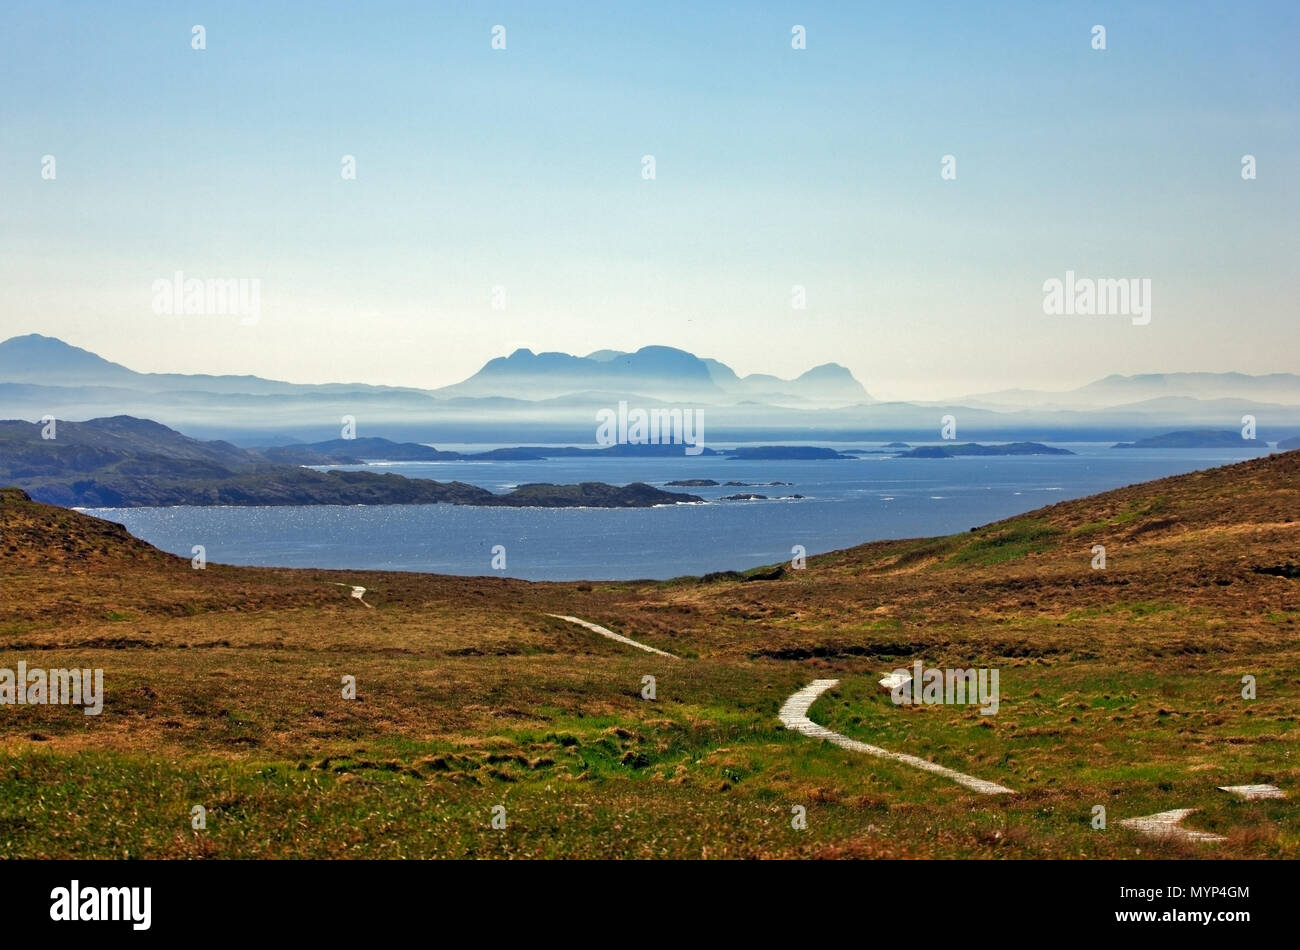 View looking south west from Handa island, Highlands, Scotland over towards Suilven, Quinag and Cul Mor mountains. Stock Photo